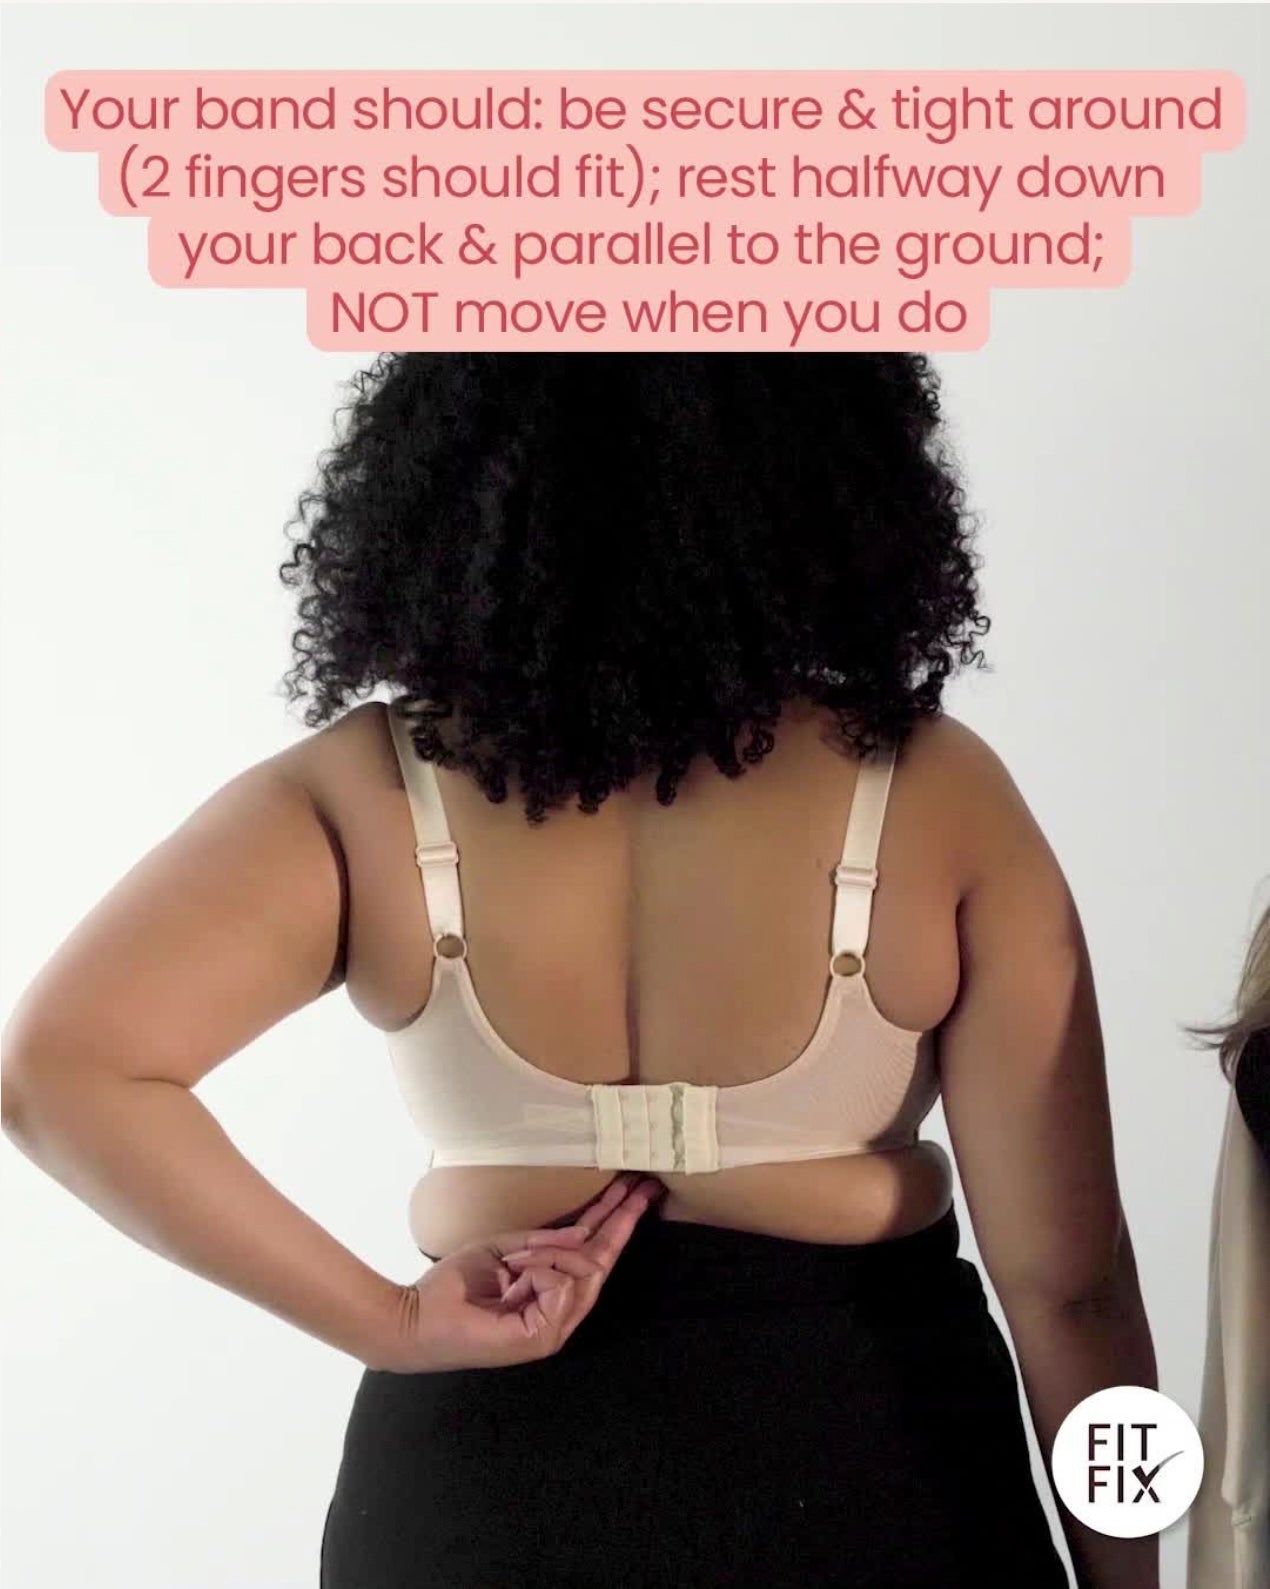 Tightening Your Bra Straps To Fix The Fit? Here's Why You Should Stop -  ParfaitLingerie.com - Blog